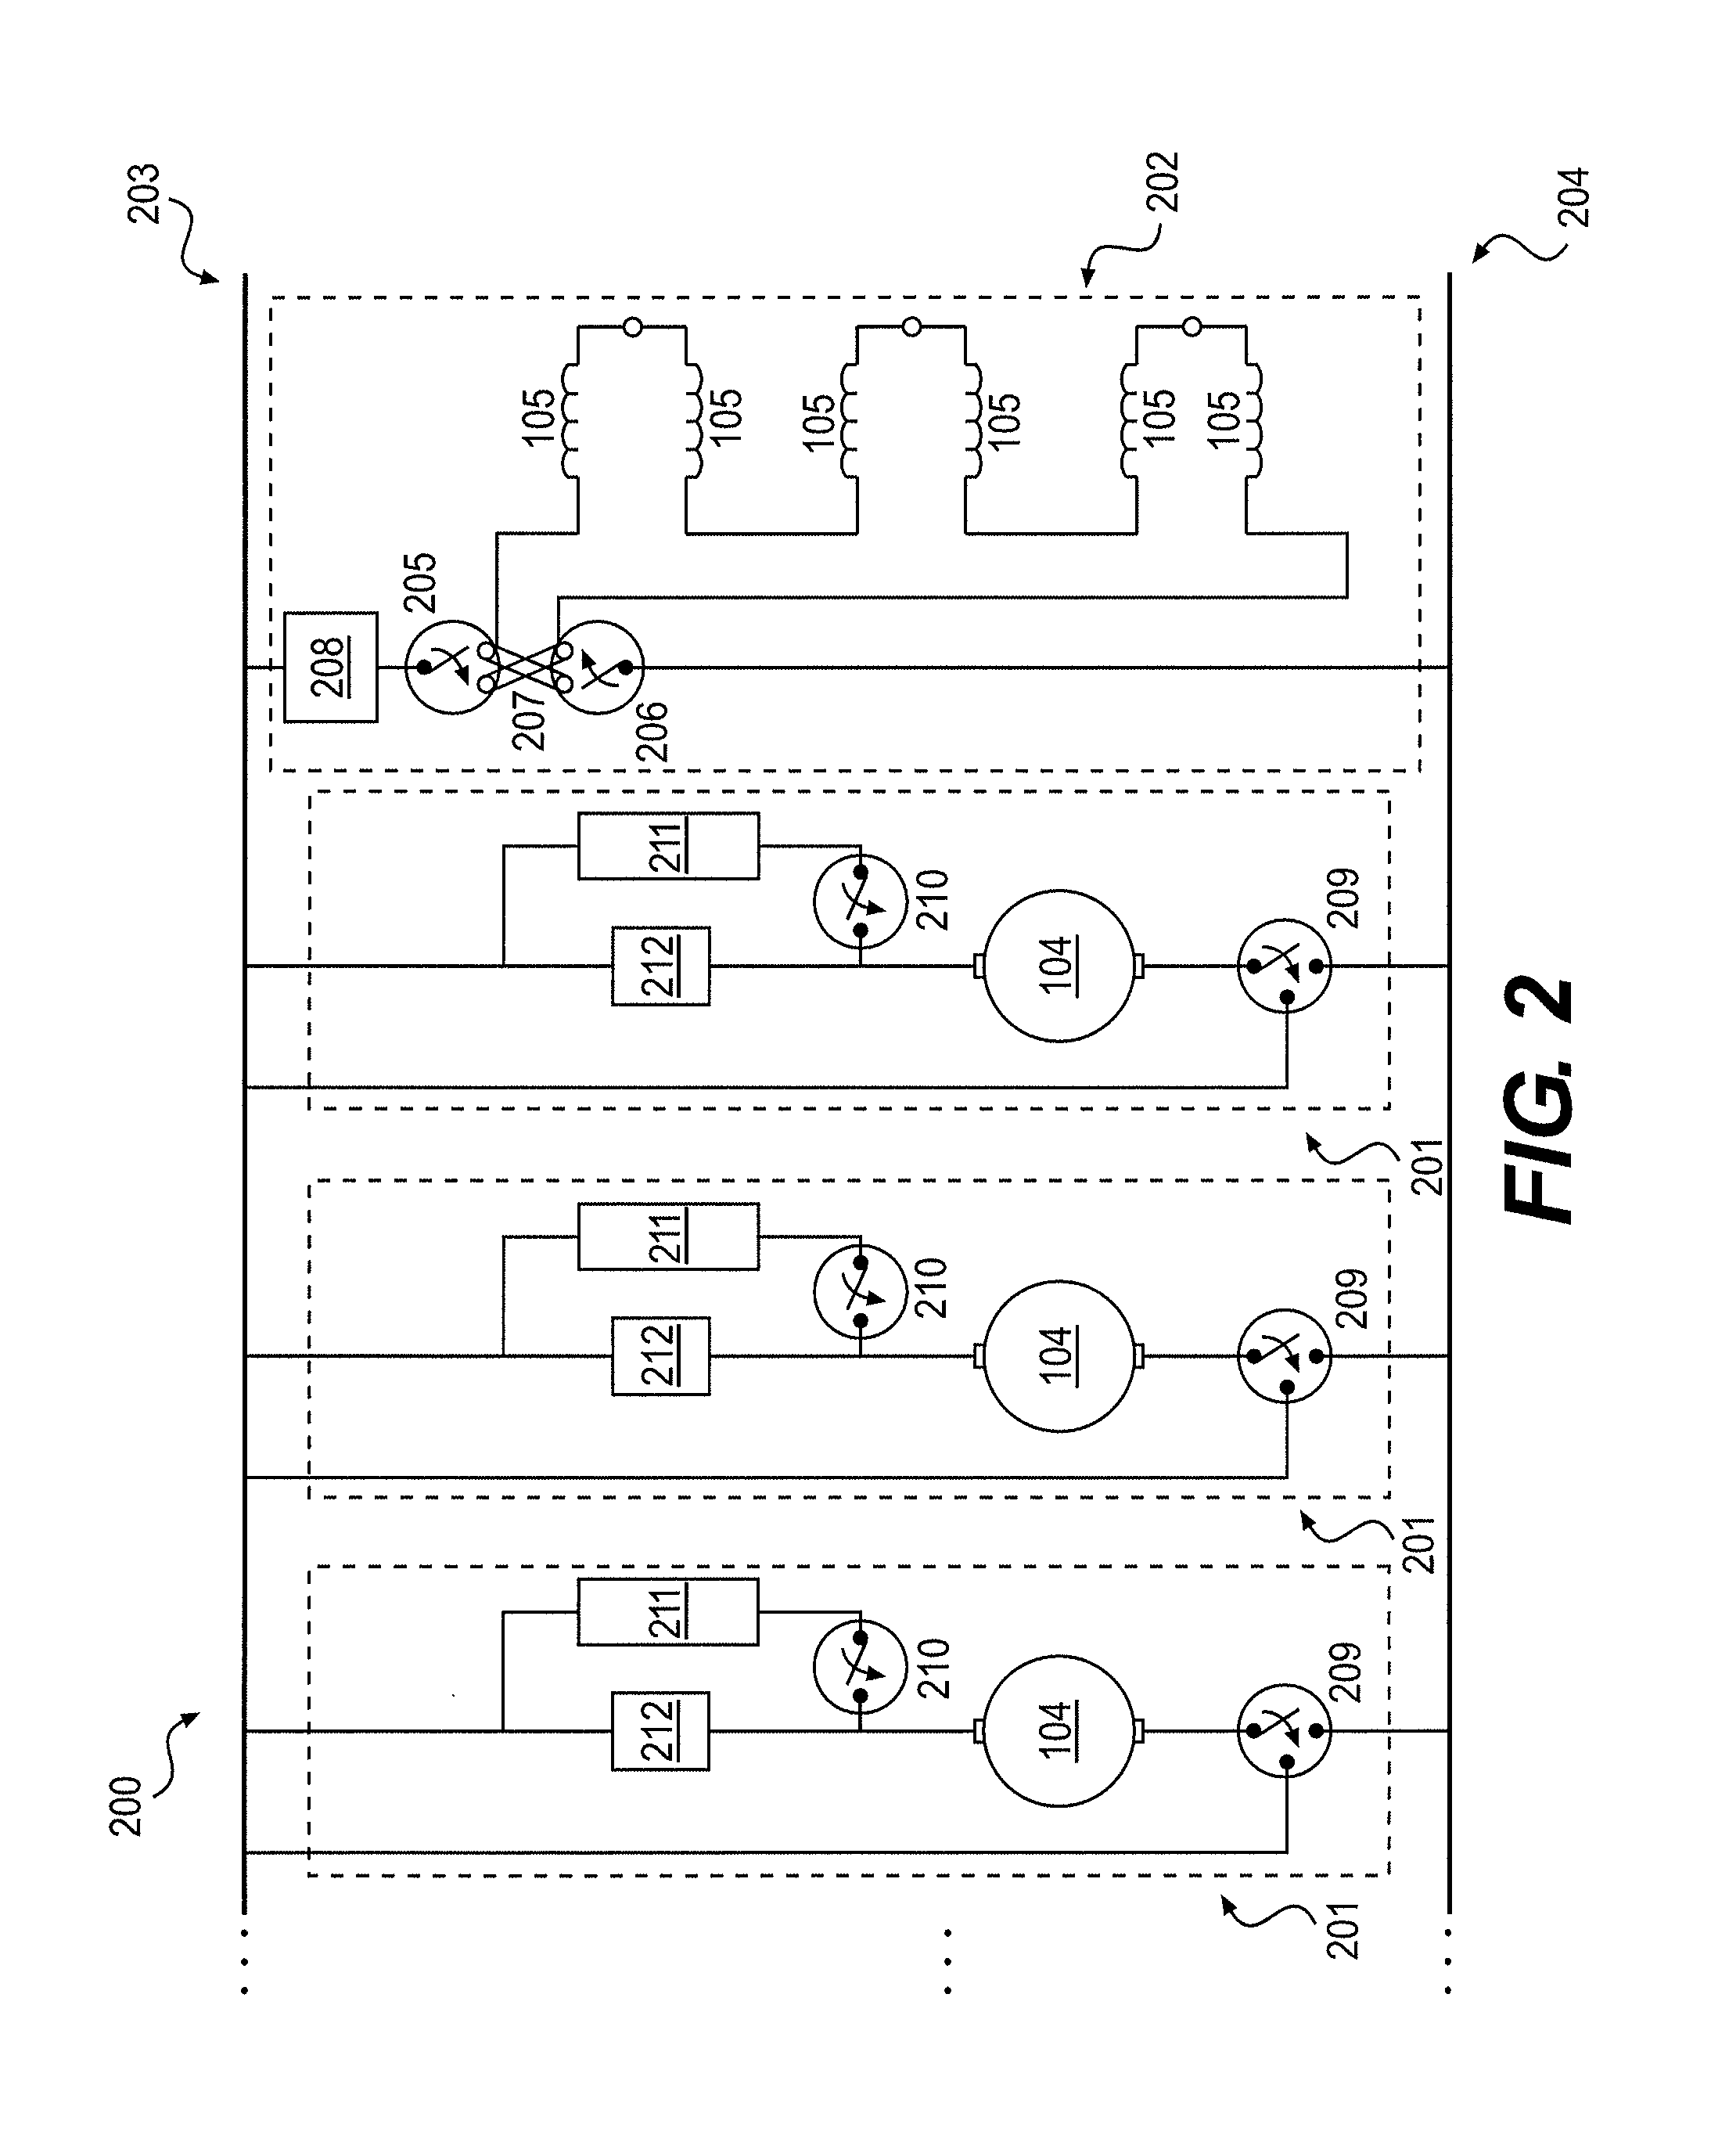 Continuously variable dynamic brake for a locomotive